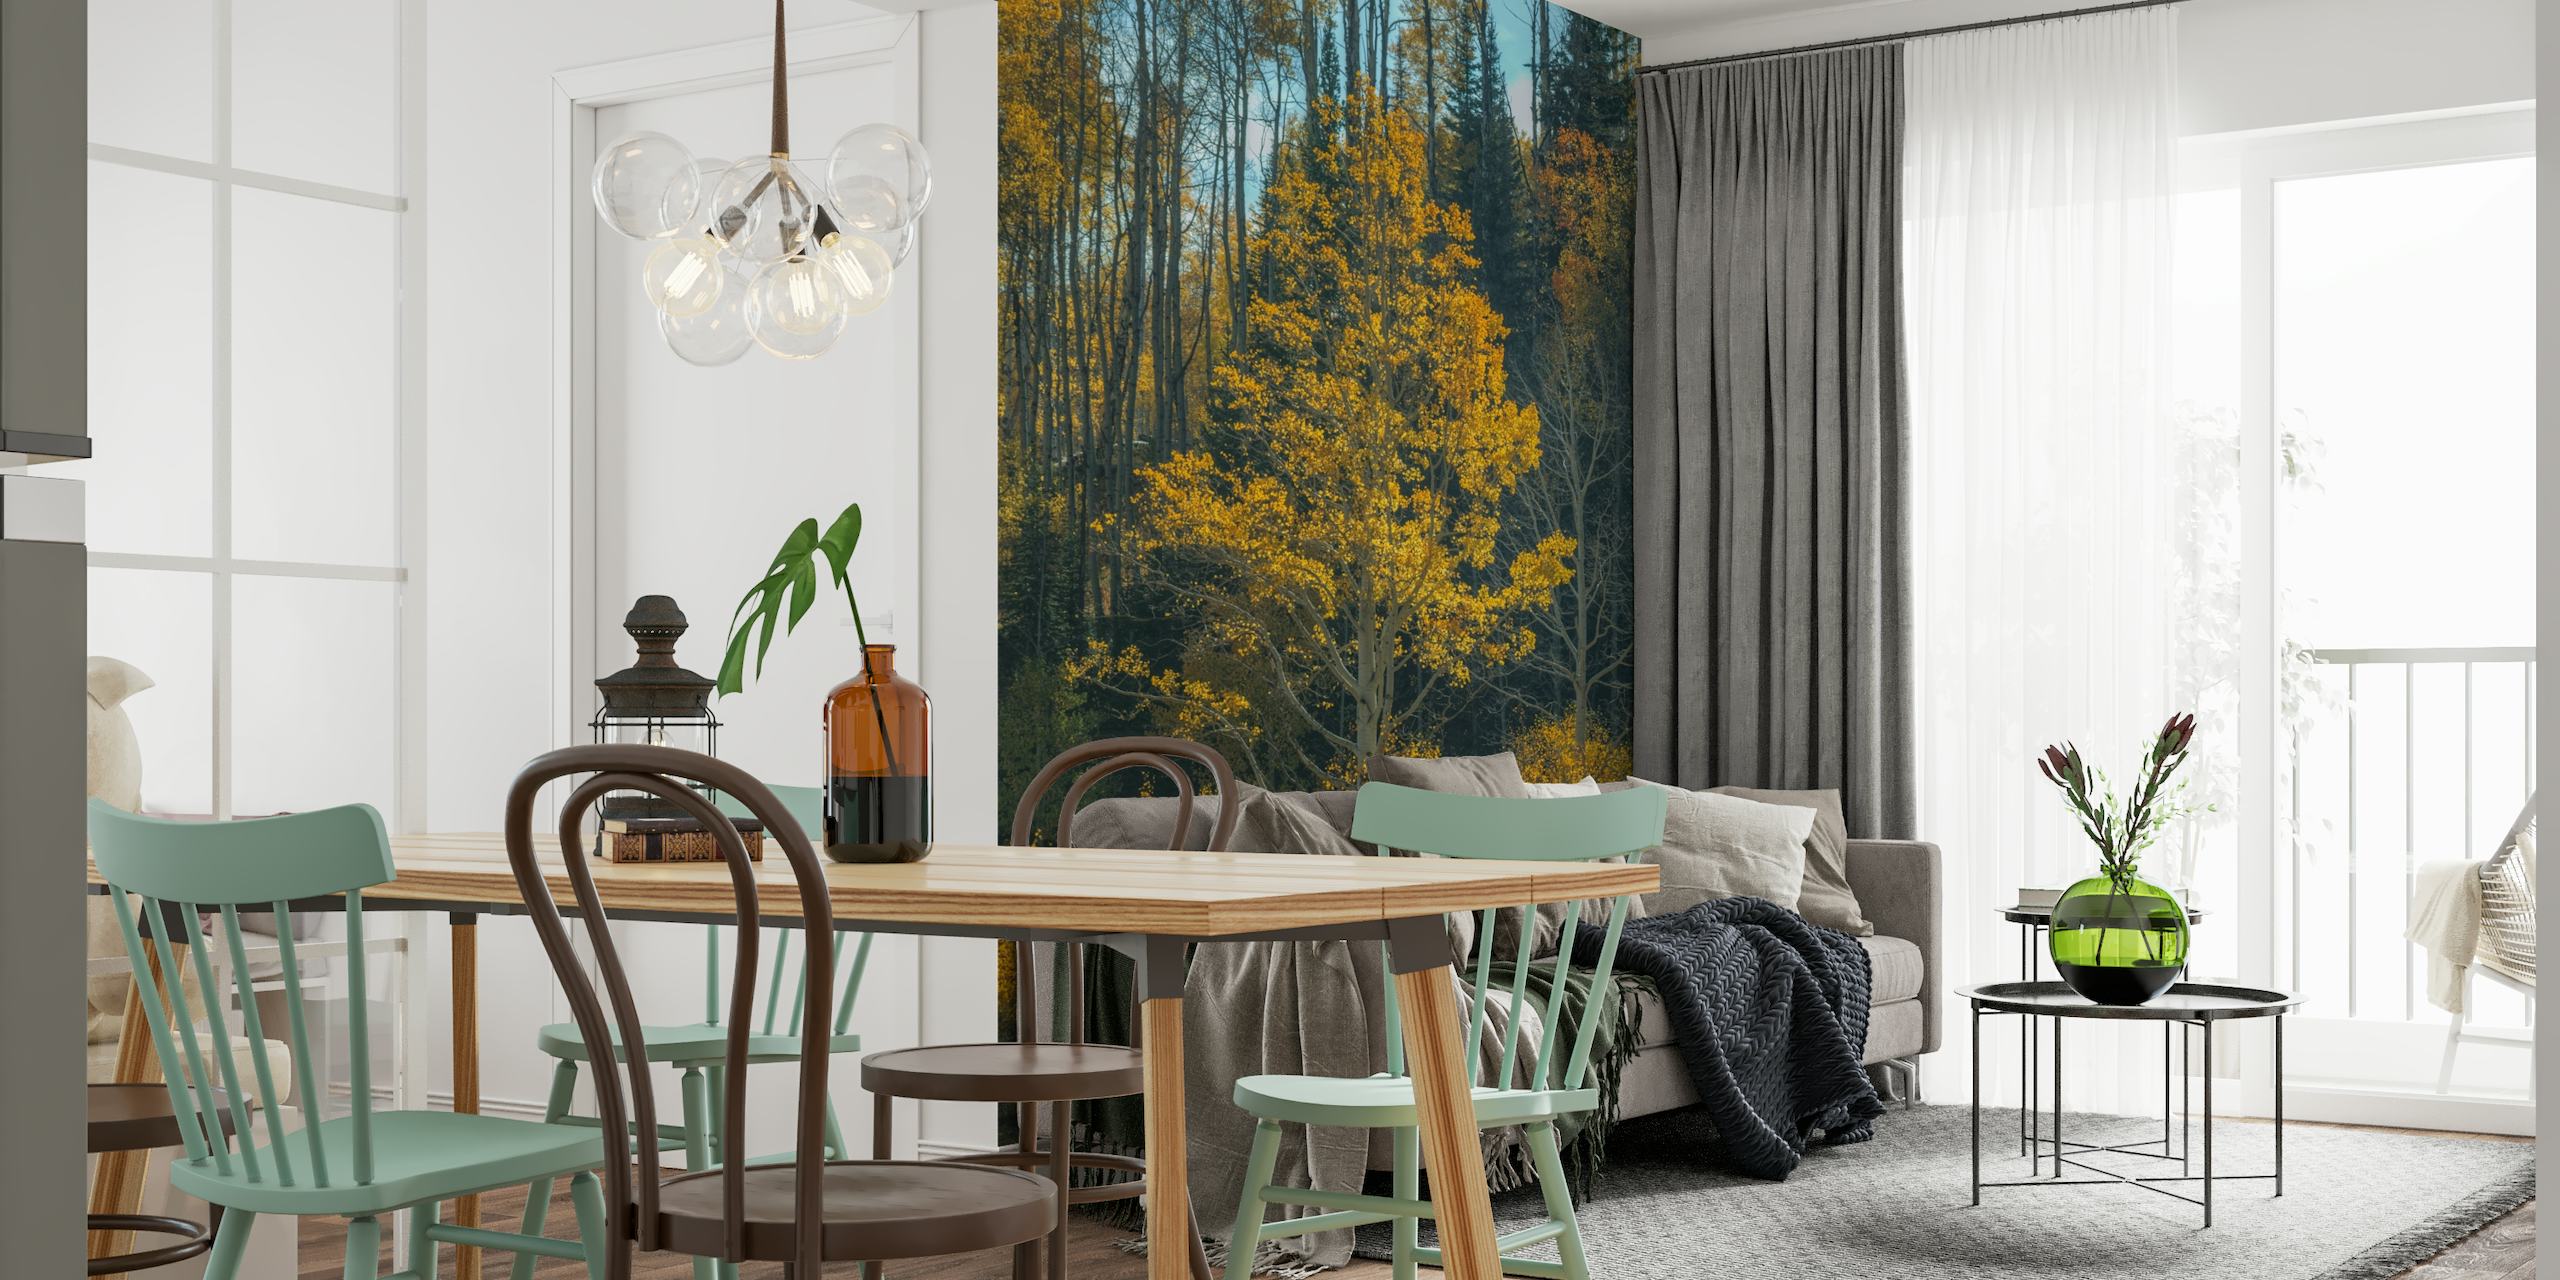 Wall mural of a tree with golden yellow leaves resembling flames against a forested backdrop